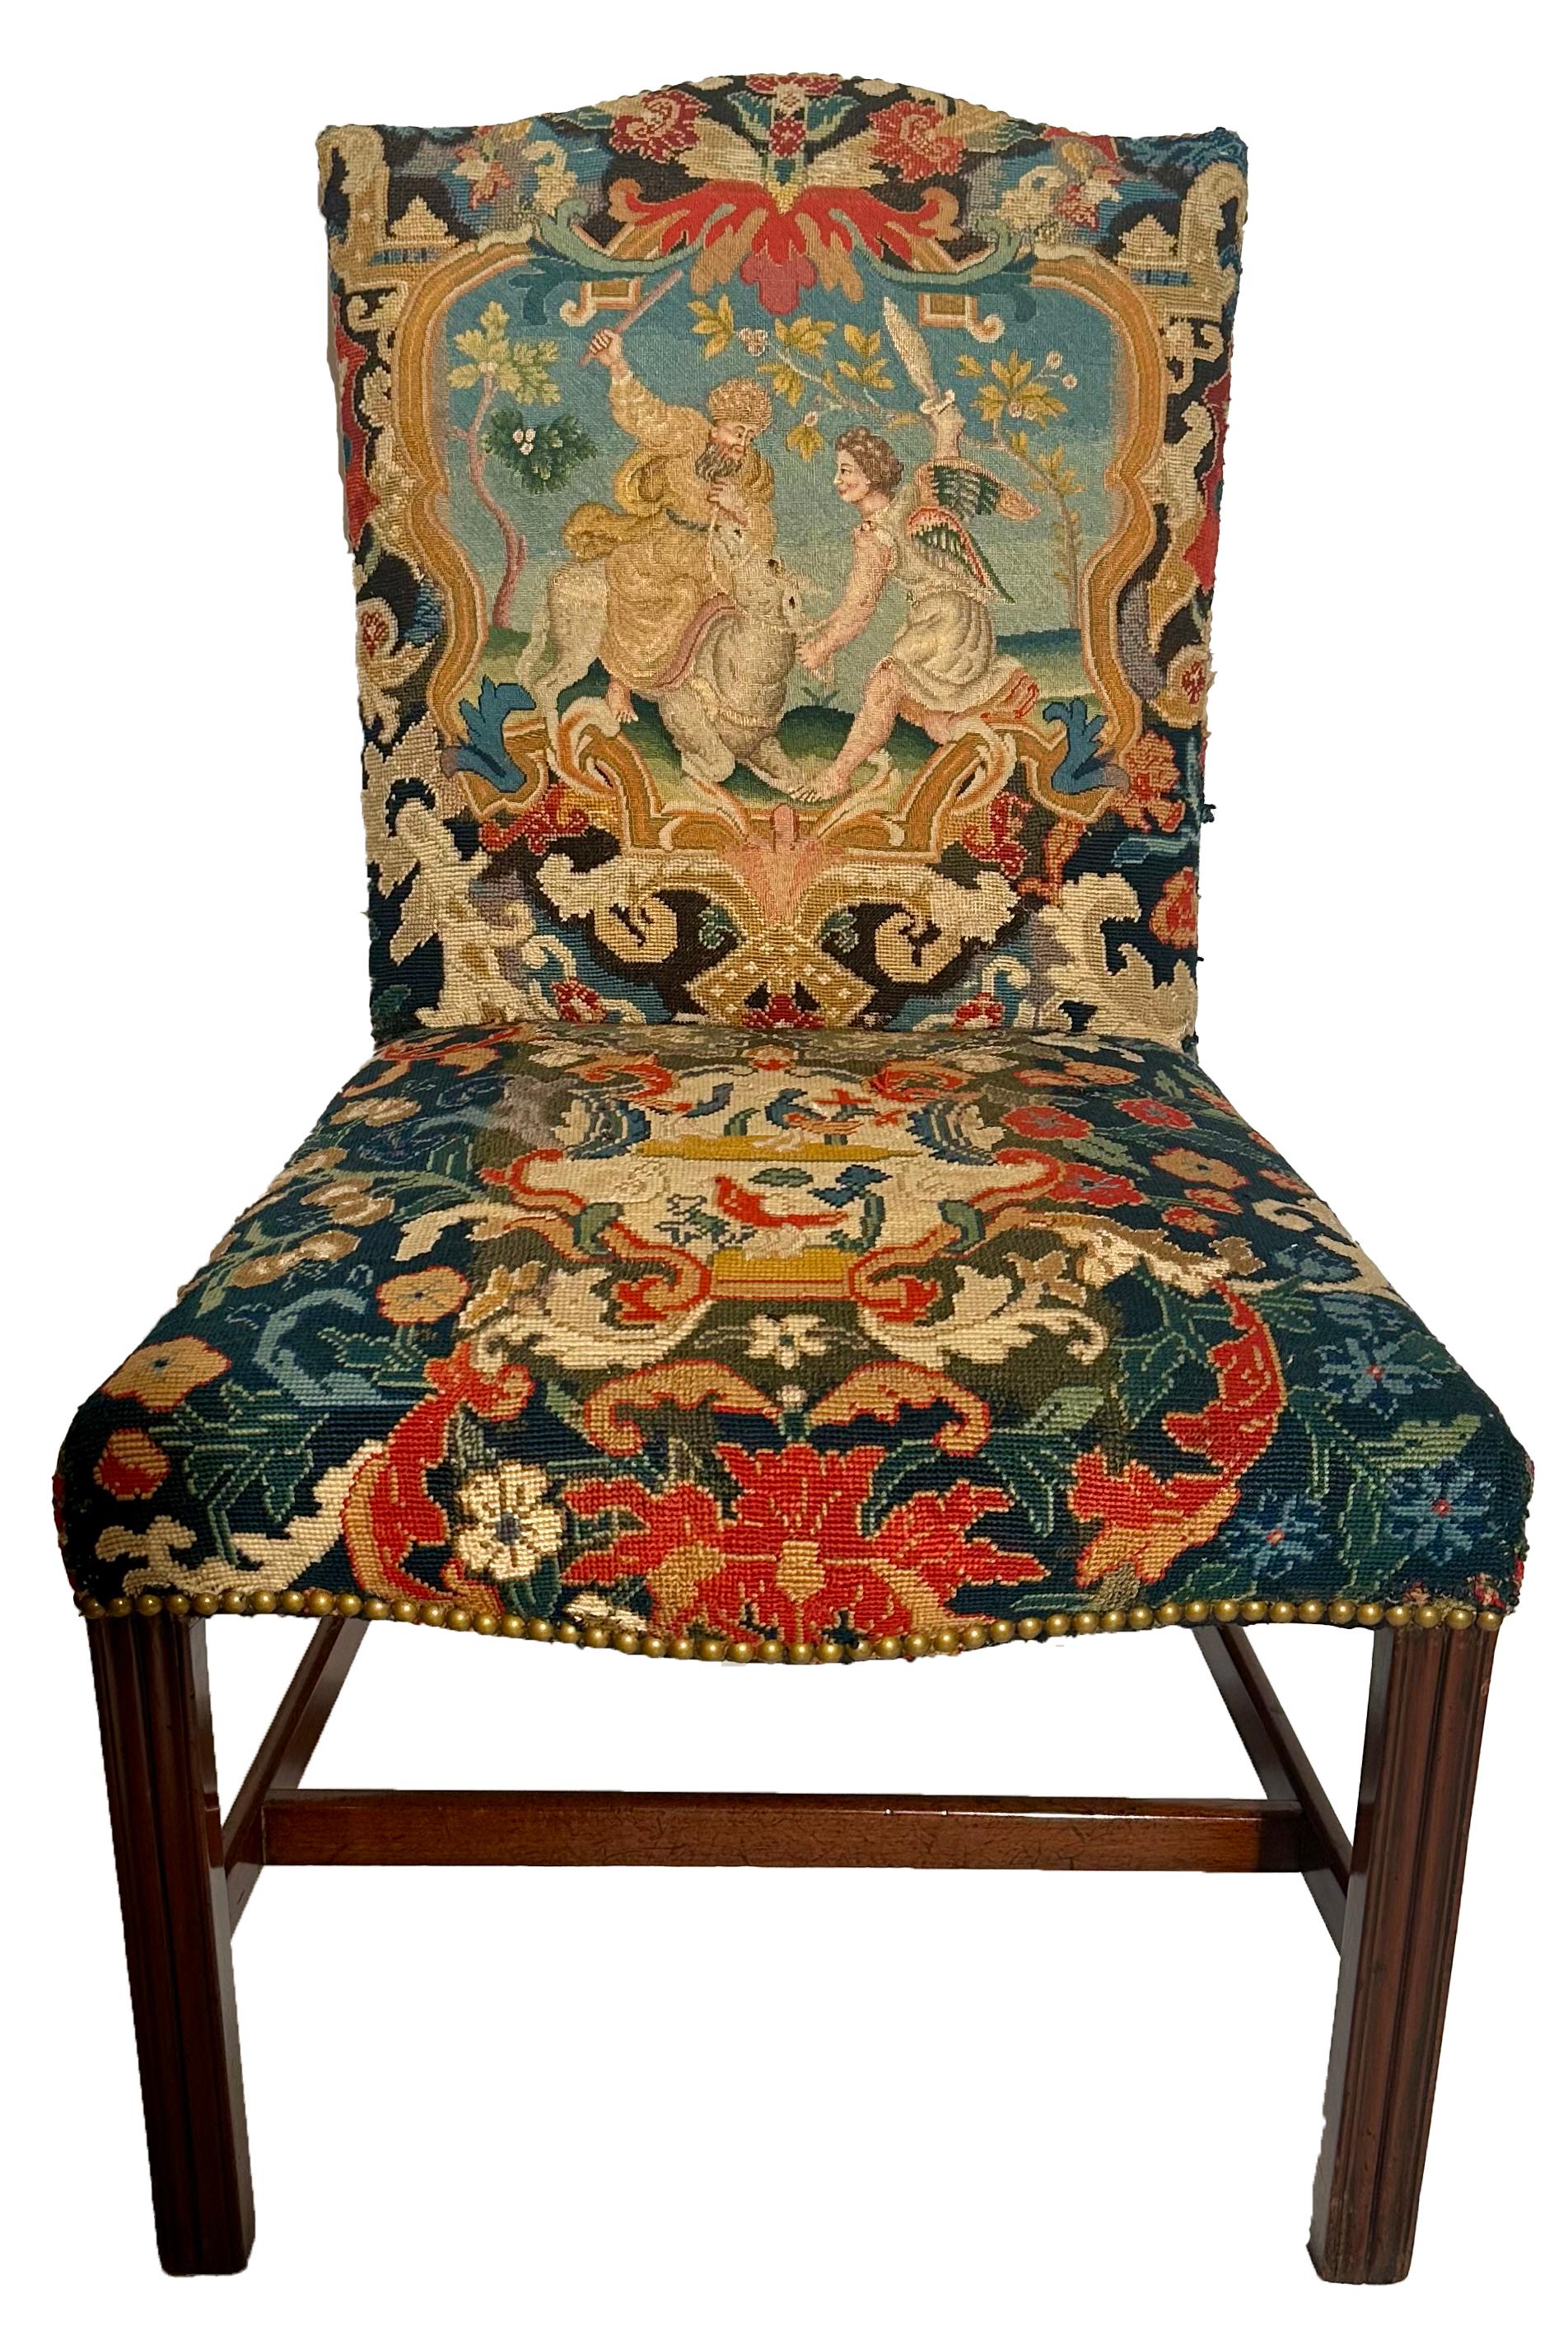 Set of 10 Antique English Georgian Mahogany and Needlepoint Chairs, Circa 1820's For Sale 5